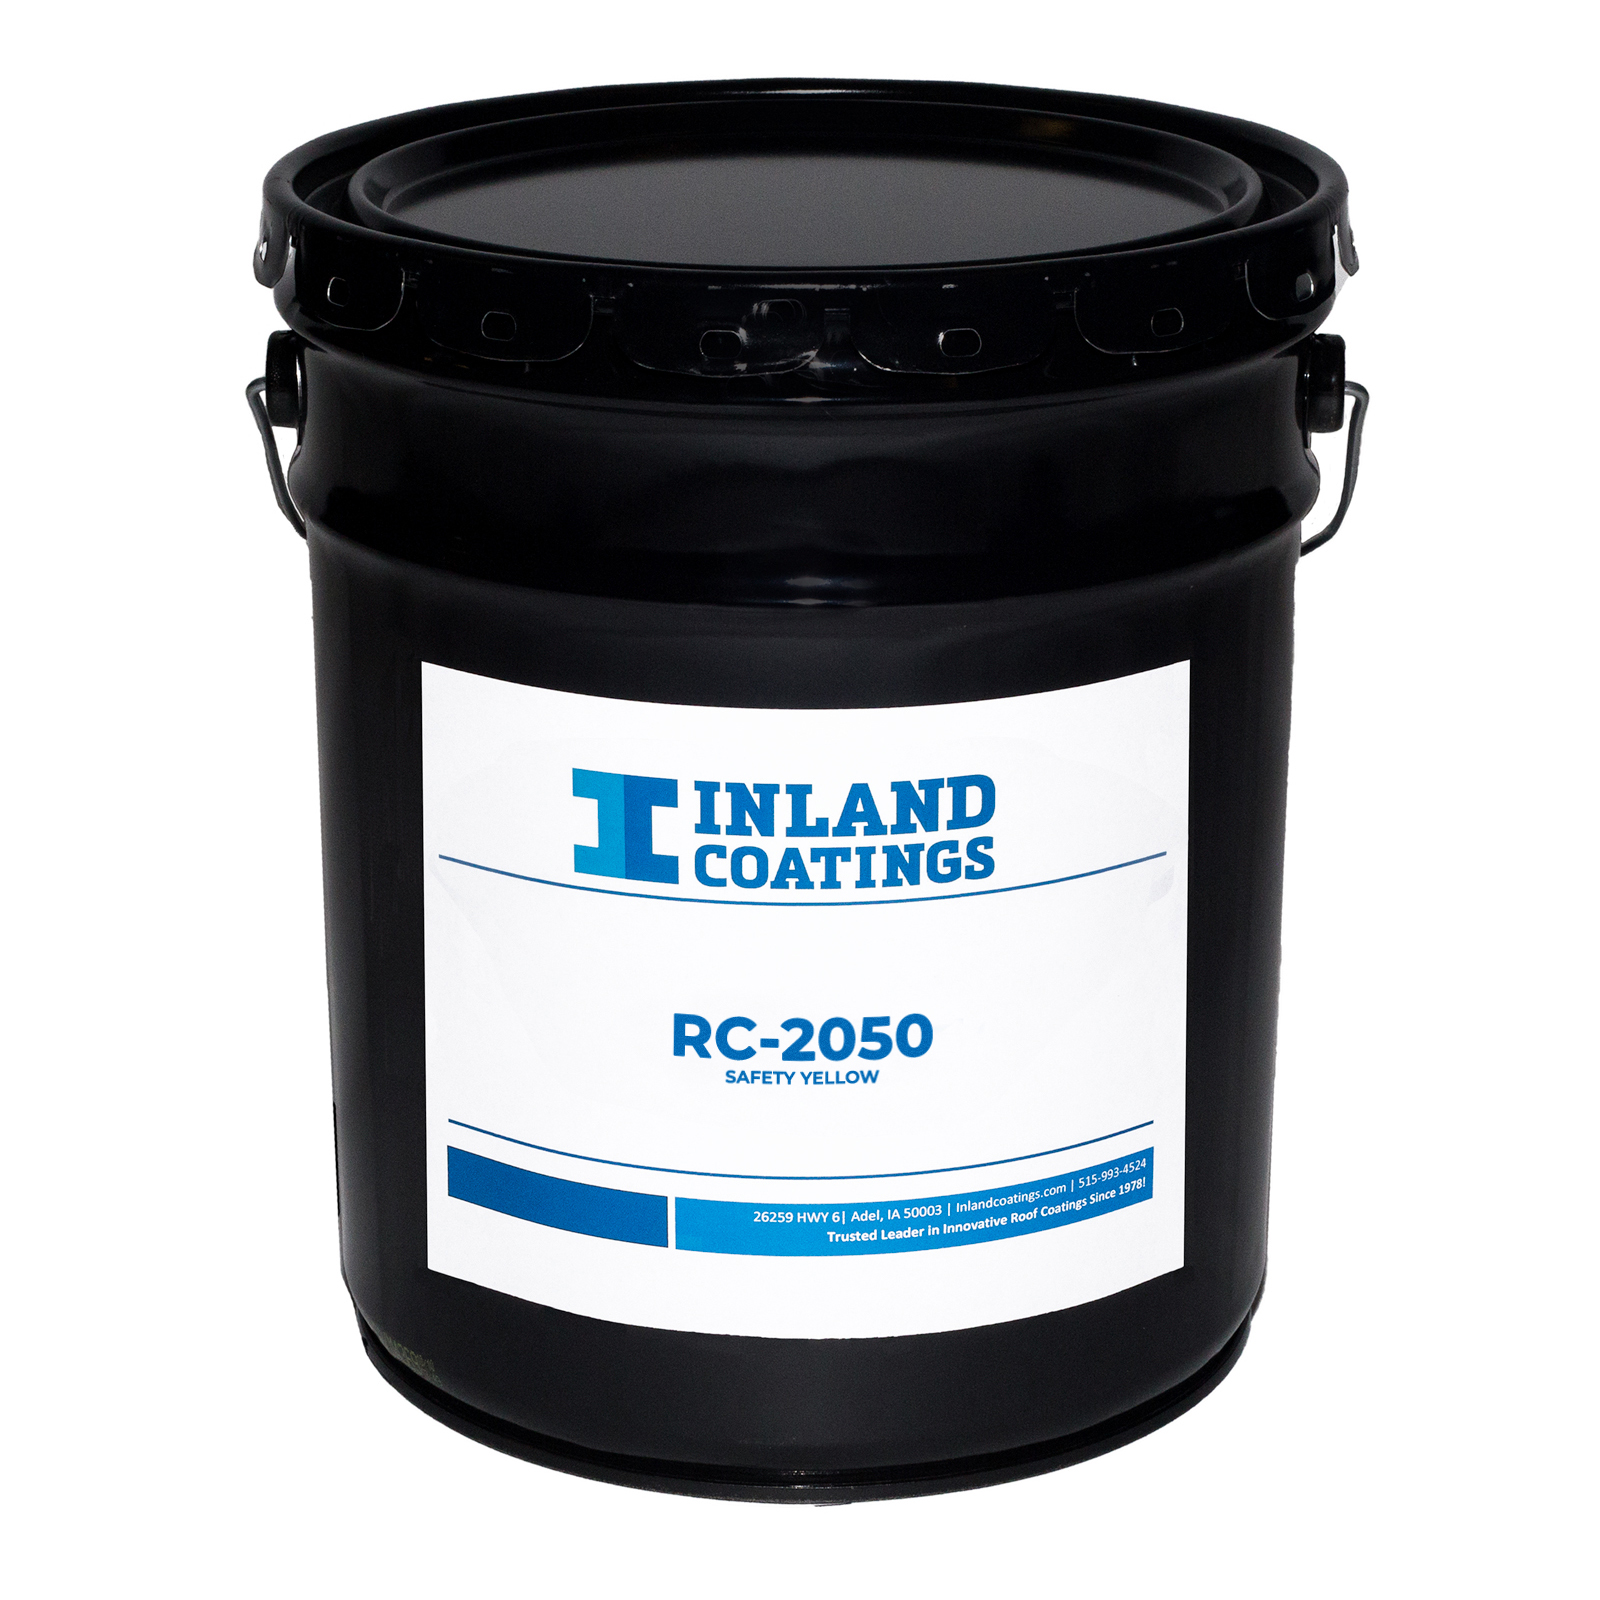 A bucket of Inland's RC-2050 Safety Yellow